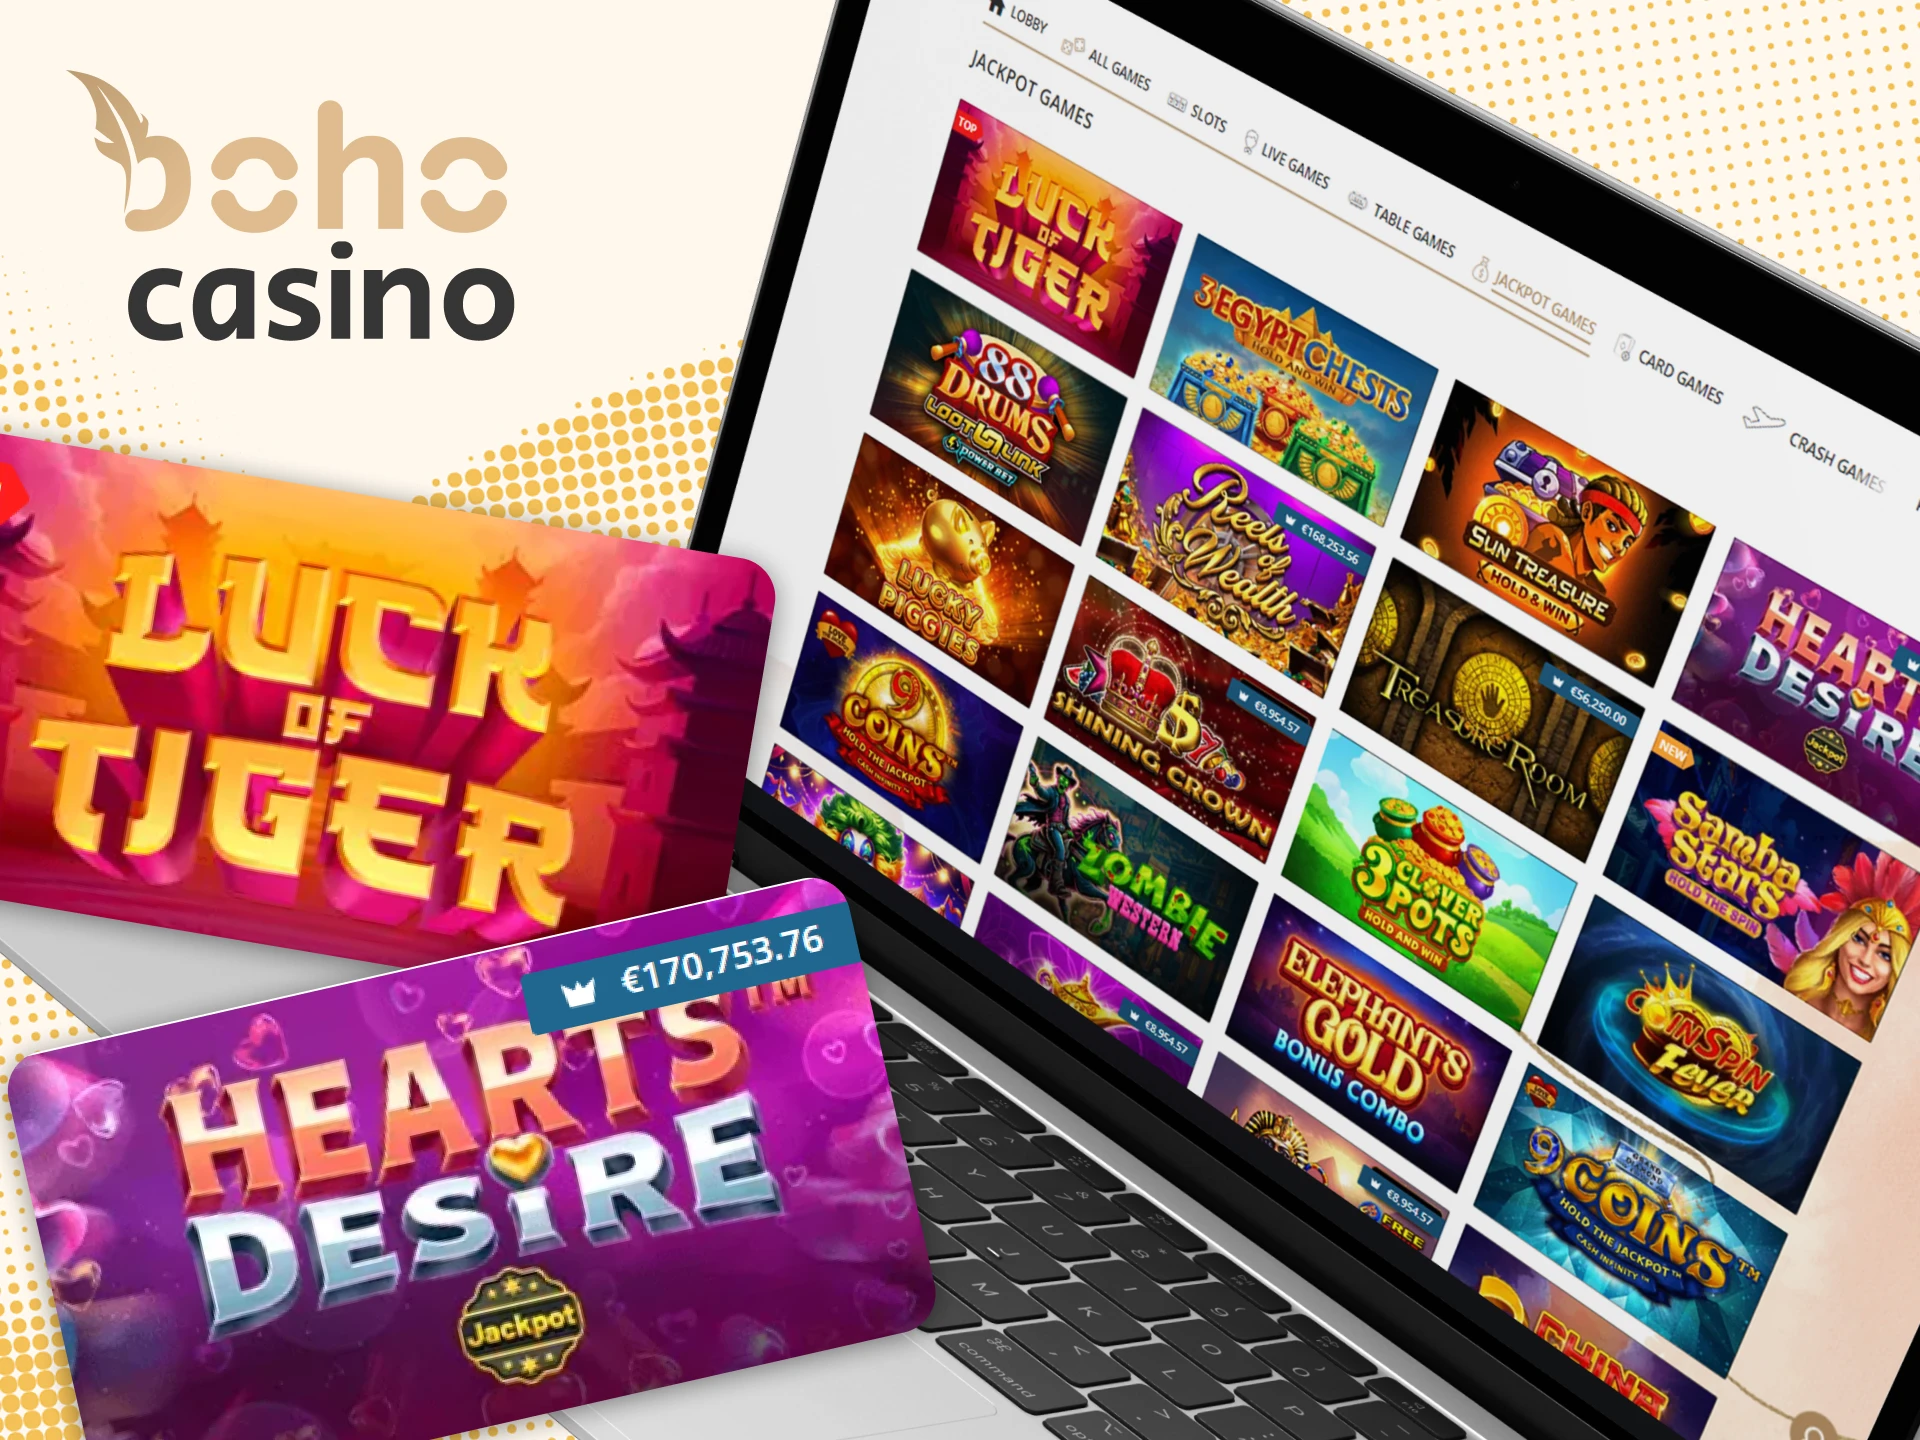 Boho Casino offers the best jackpot games in New Zealand.